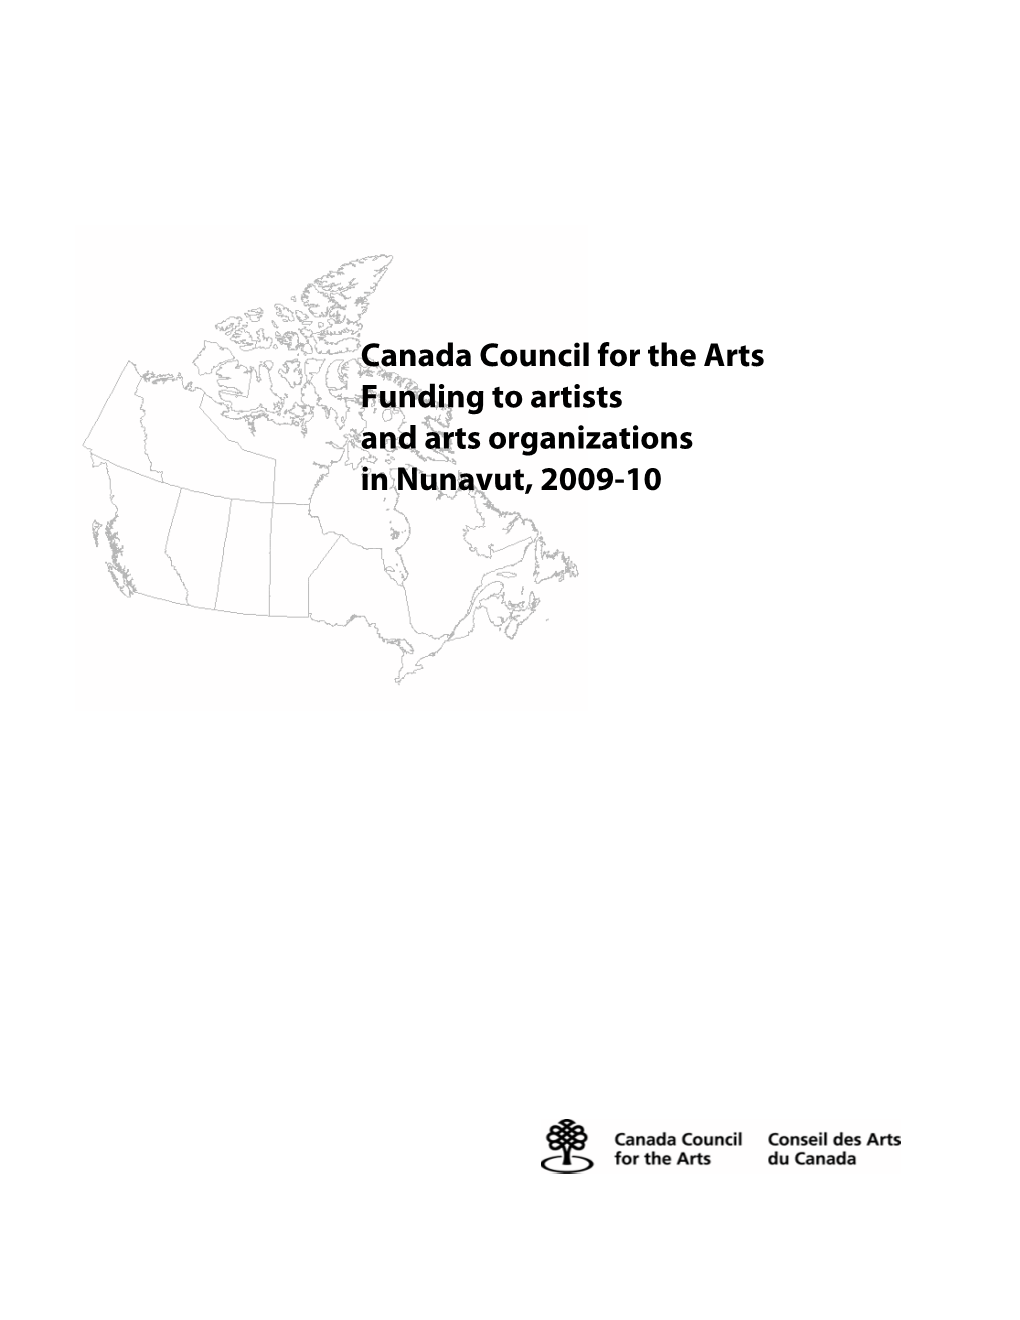 Canada Council for the Arts Funding to Artists and Arts Organizations in Nunavut, 2009-10